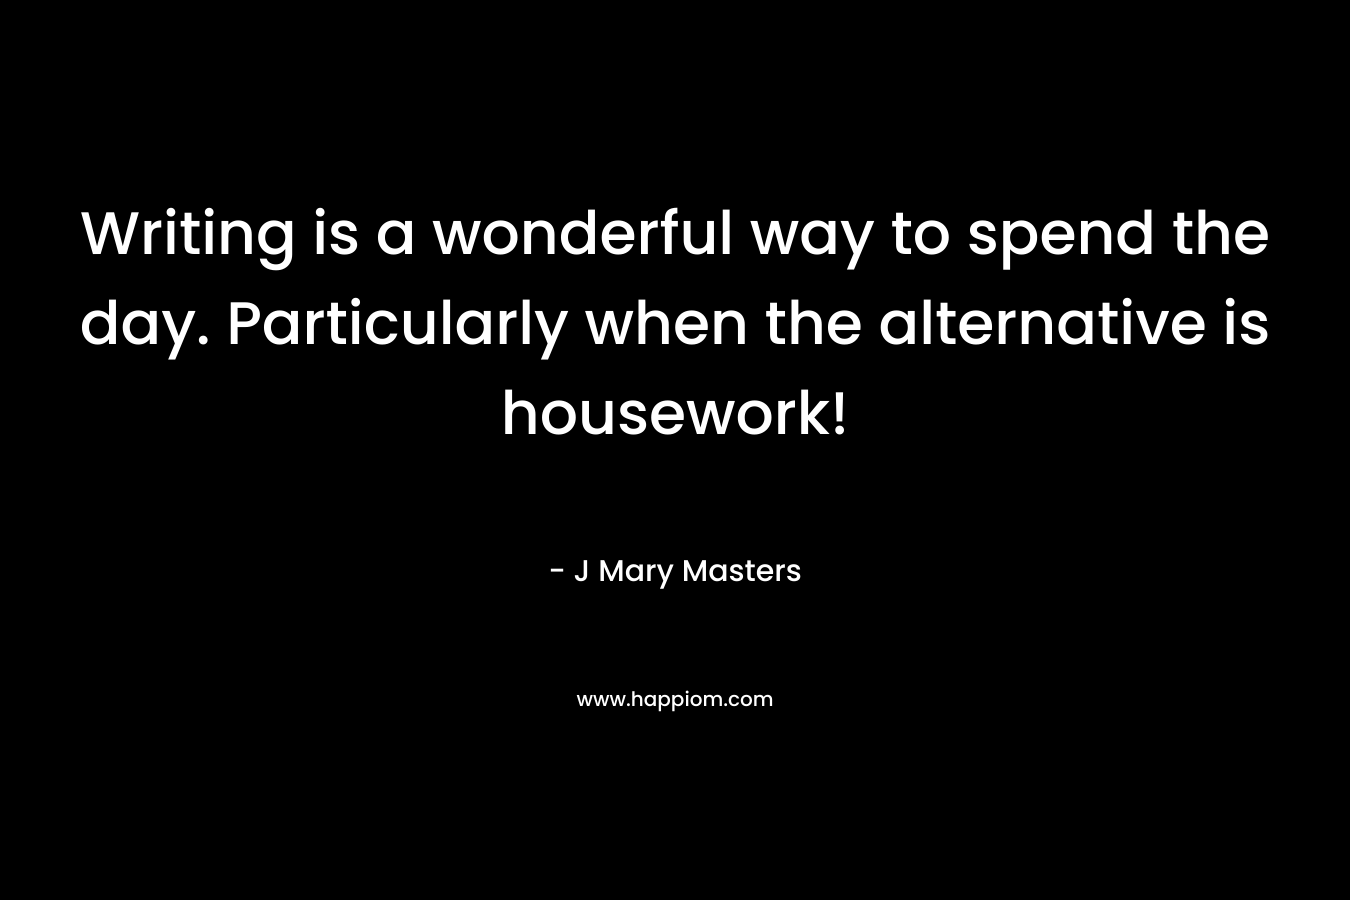 Writing is a wonderful way to spend the day. Particularly when the alternative is housework!